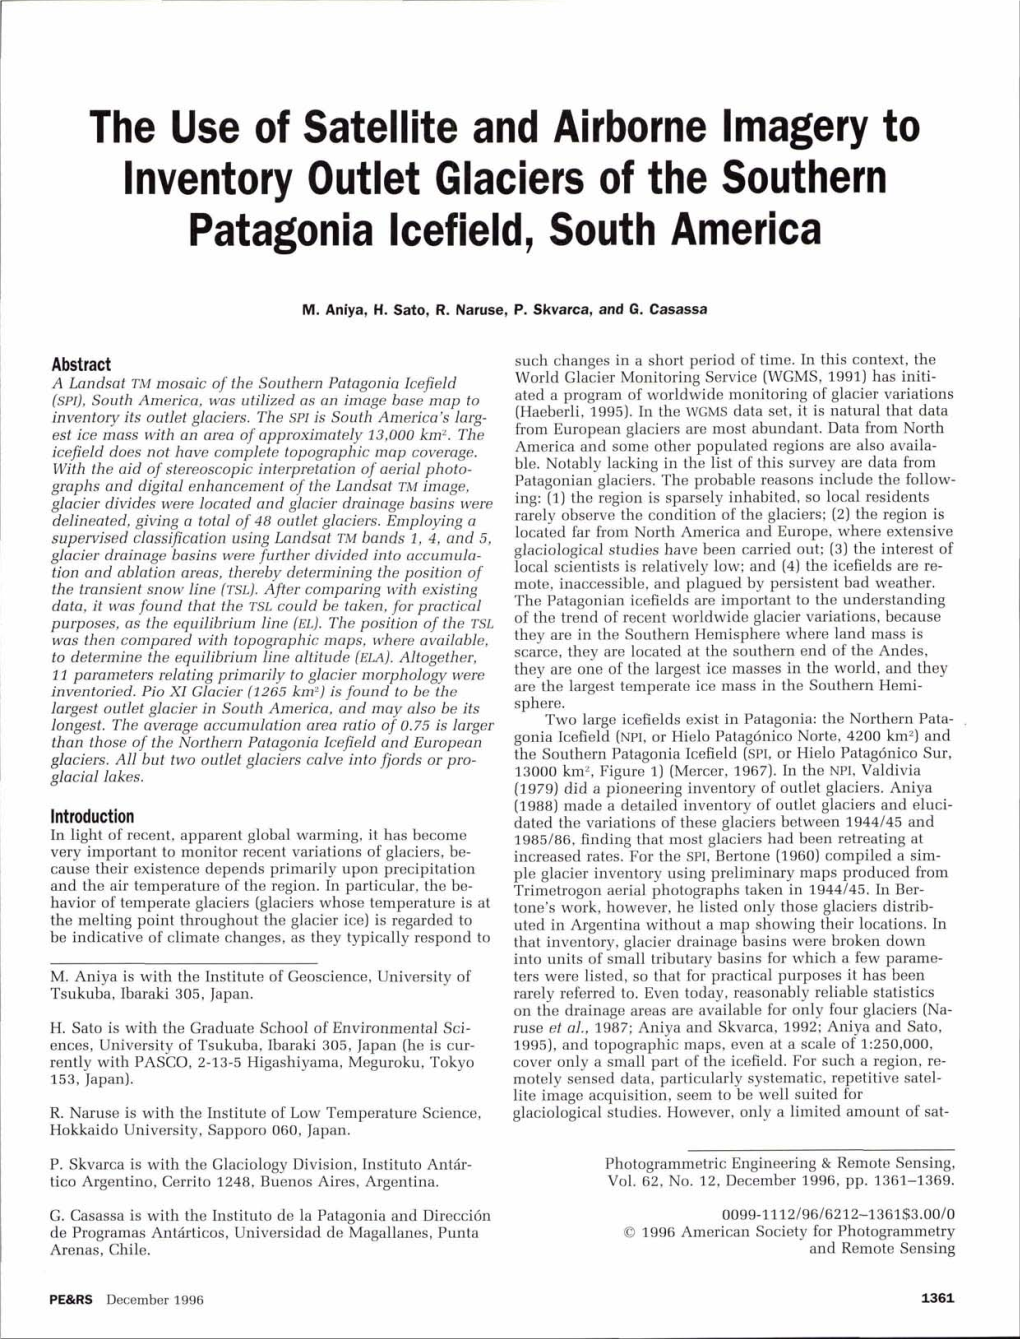 The Use of Satellite and Airborne Imagery to Inventory Outlet Glaciers of the Southern Patagonia Icefield, South America